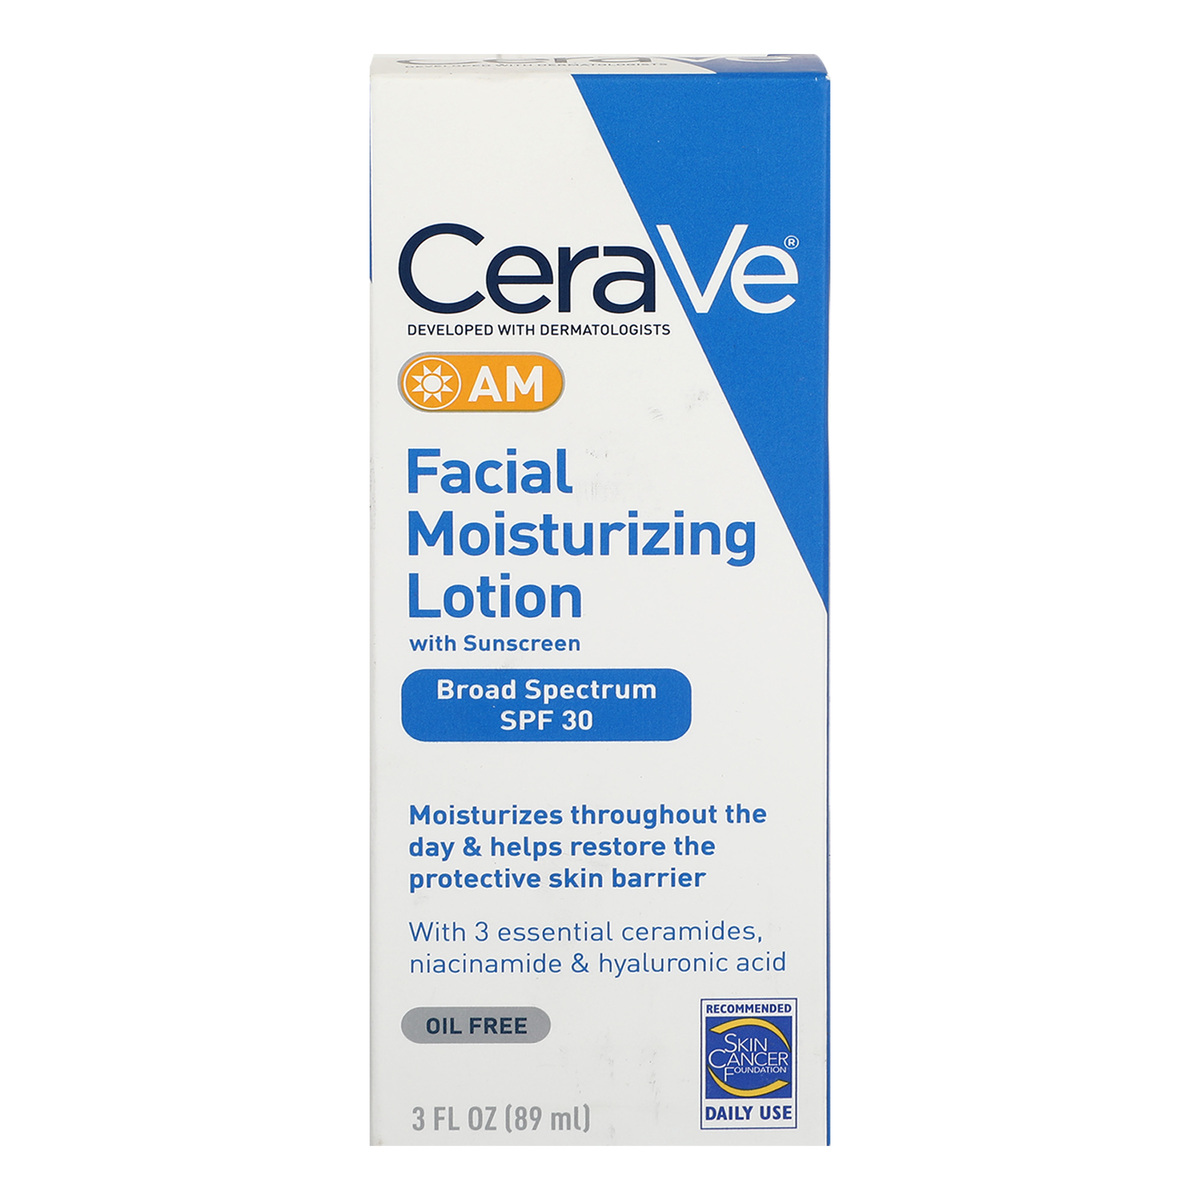 CeraVe AM Facial Moisturizing Lotion with Sunscreen, Oil Free, 89 ml